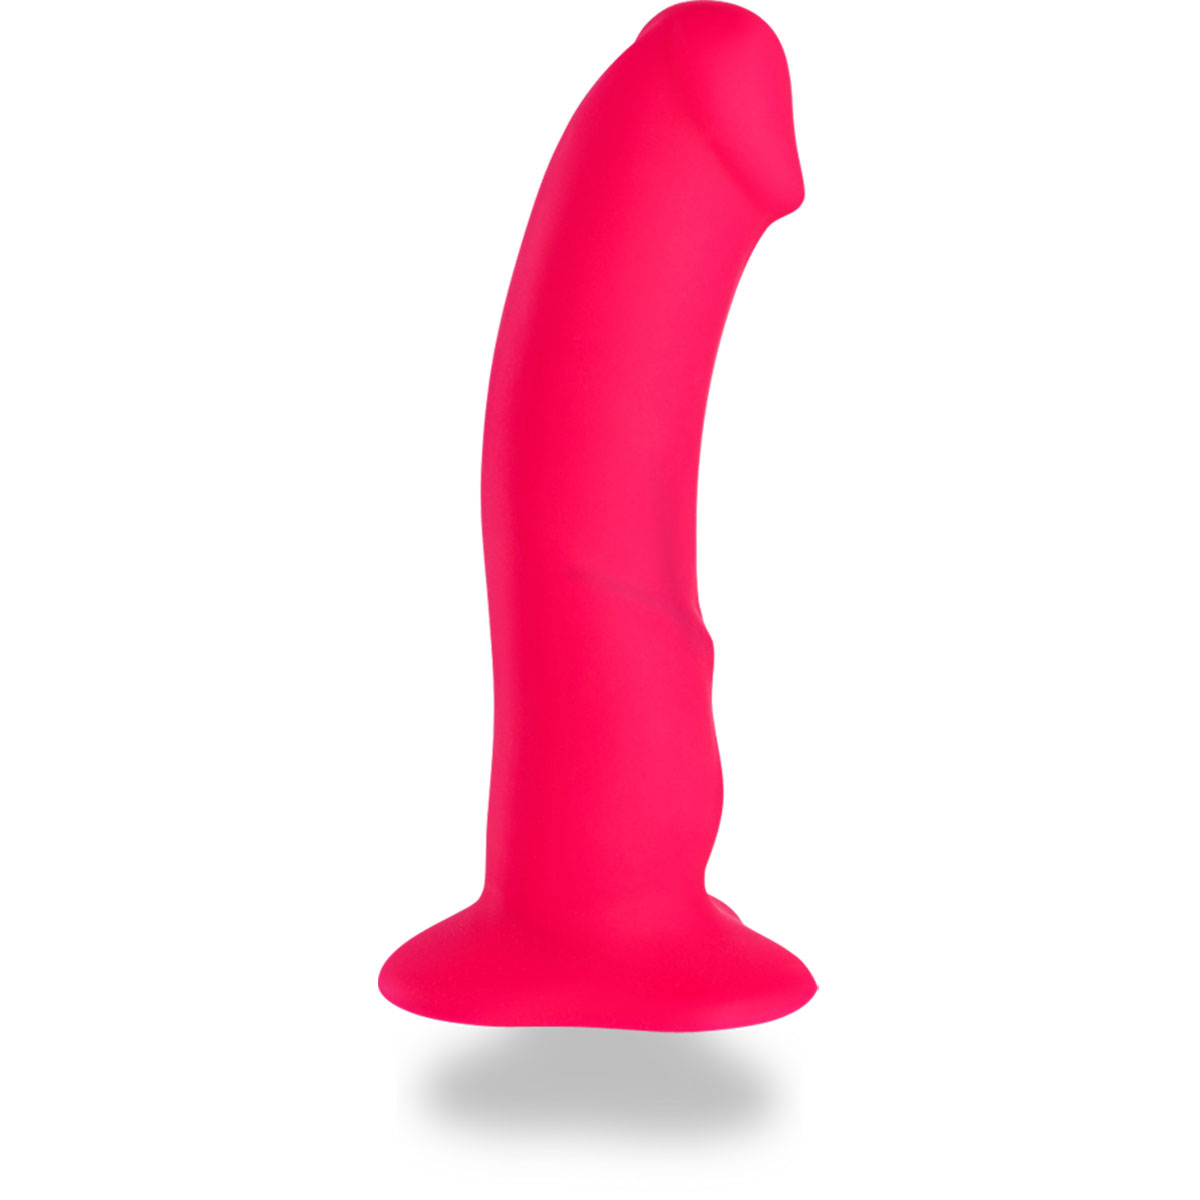 Buy Fun Factory Boss Dil   Pink 7 long and 1.65 thick dildo made by Fun Factory.